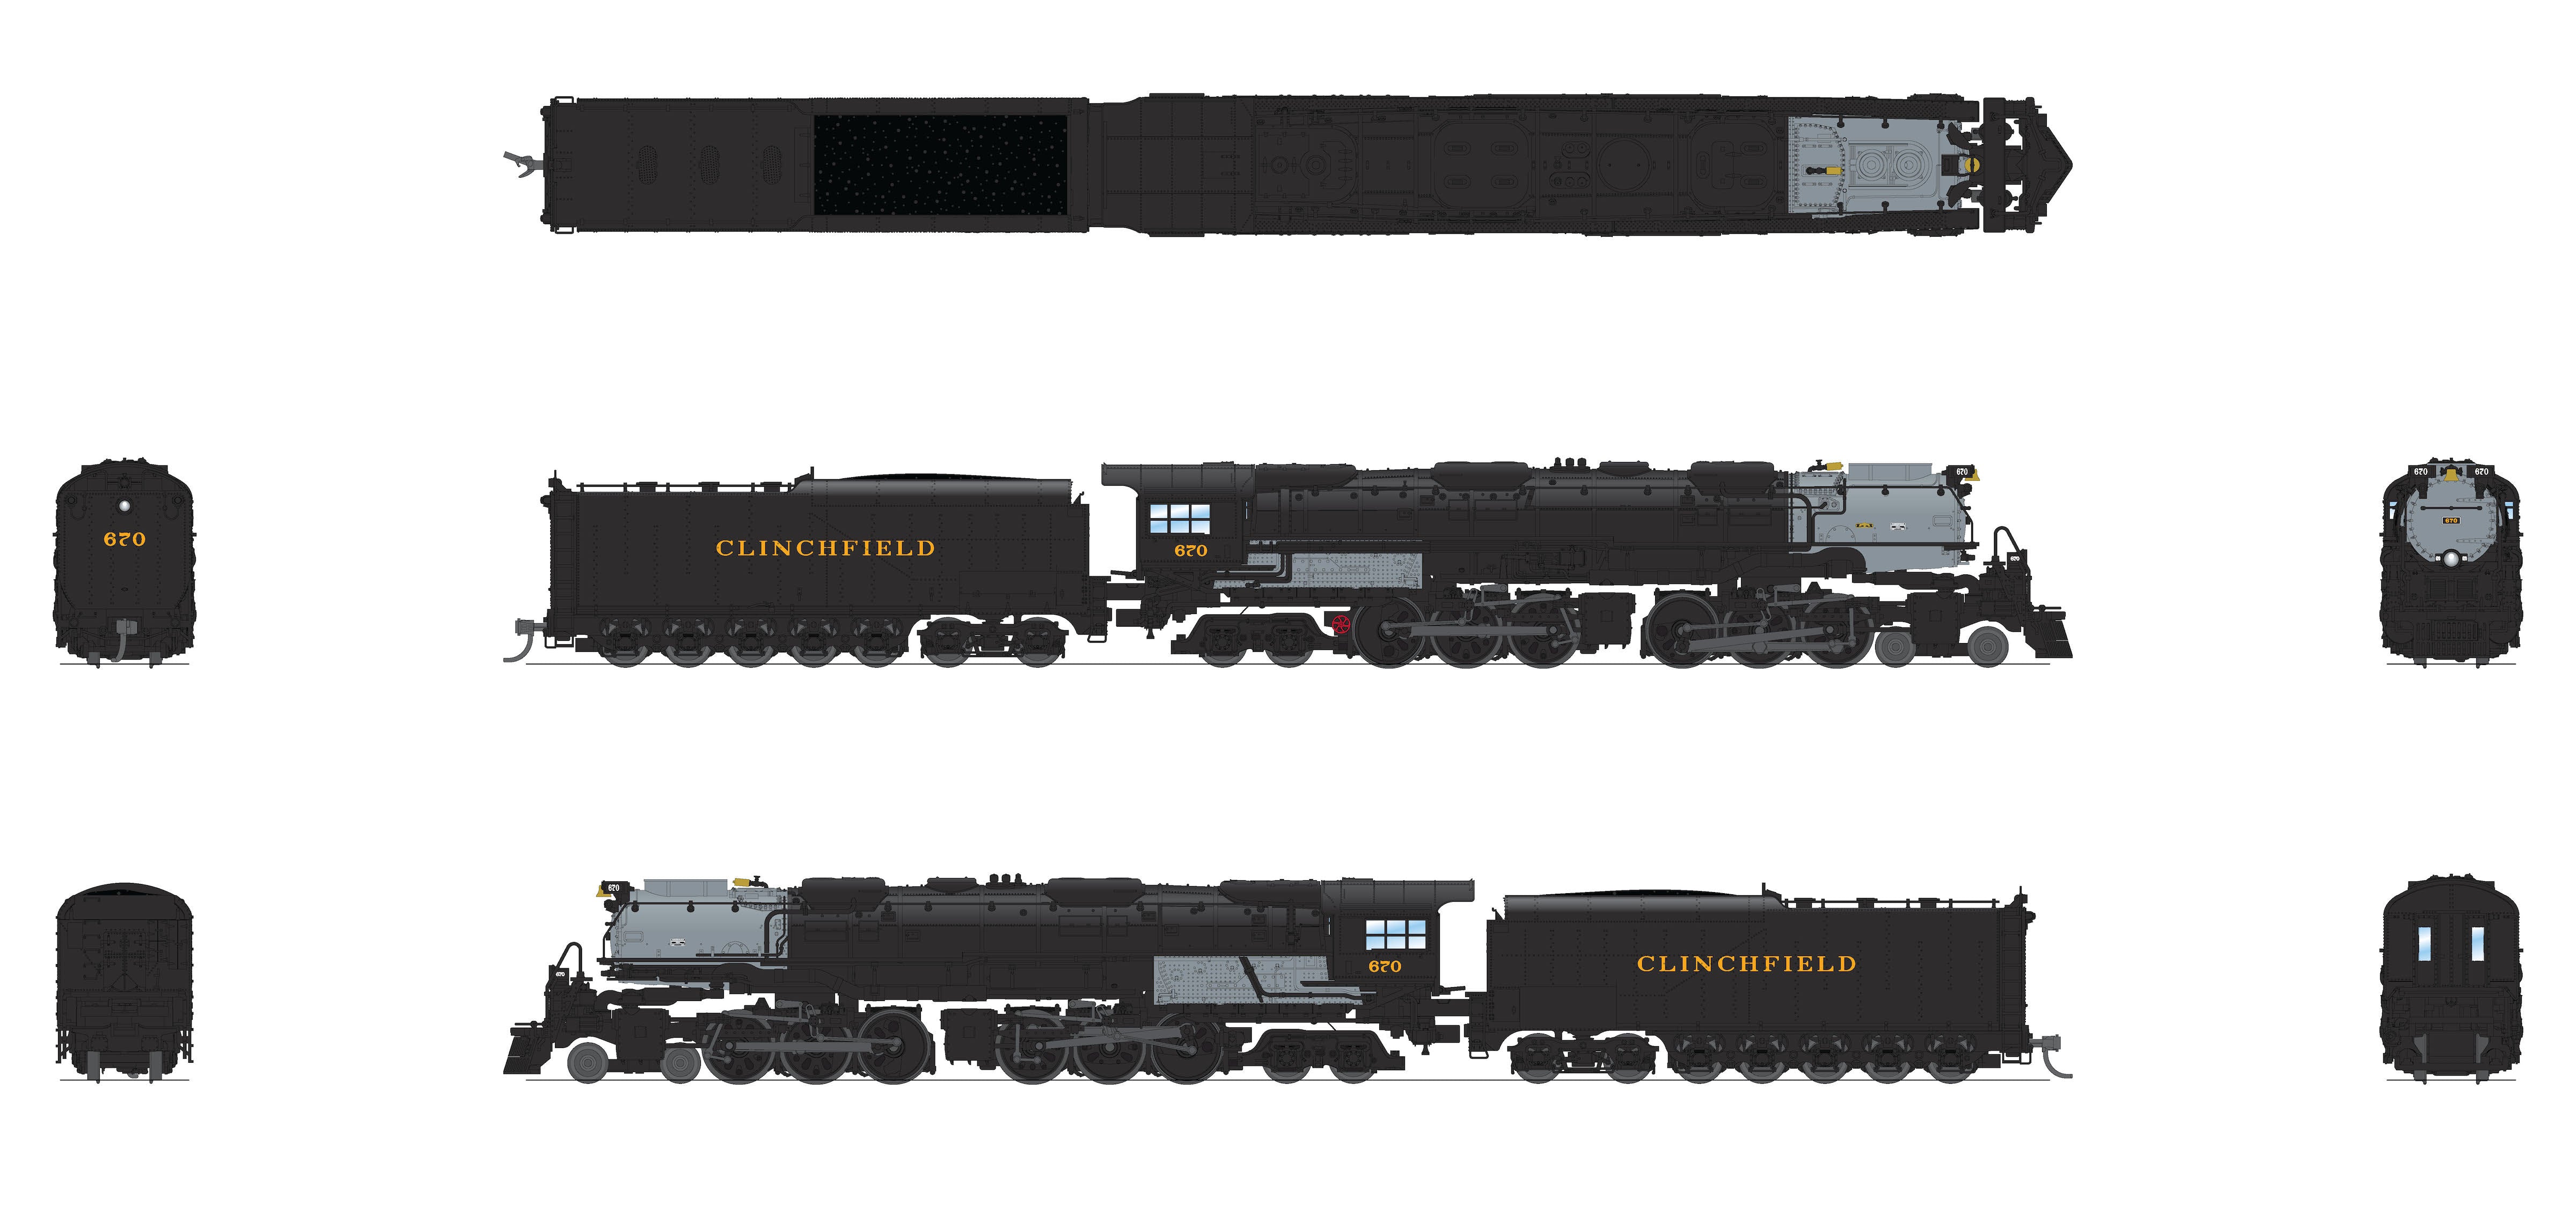 8659 Clinchfield Challenger 4-6-6-4, #670, Black & Graphite, Coal Tender, No-Sound / DCC-Ready, N